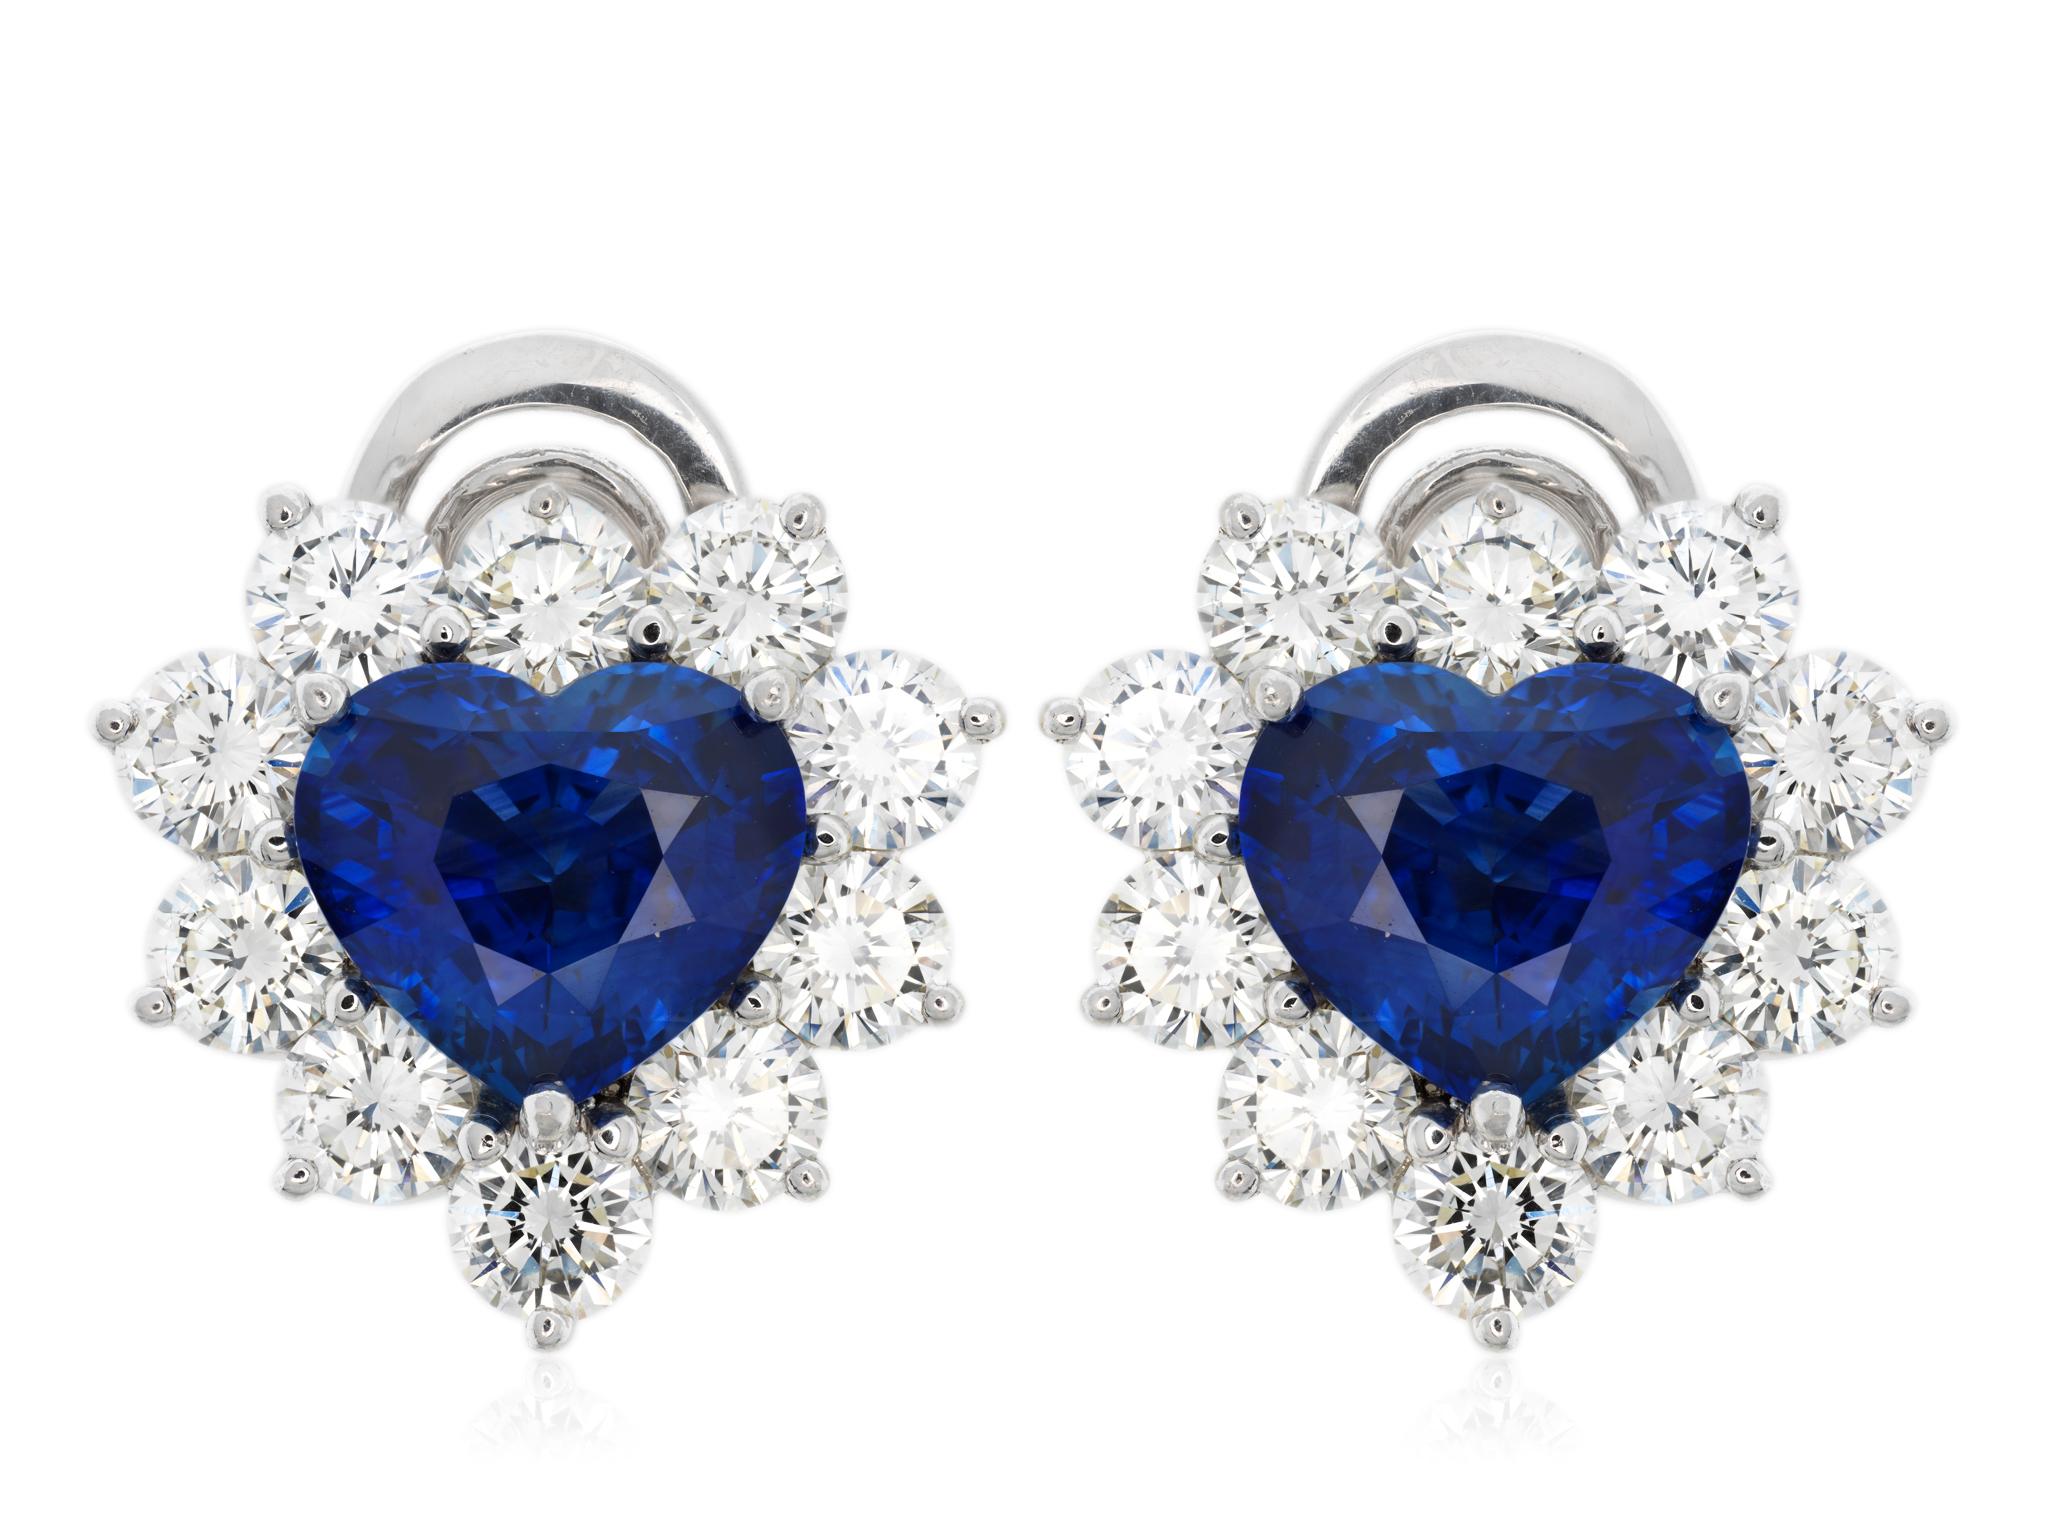 4.91 Carat Heart Shaped Sapphire and Diamond Earrings im Zustand „Hervorragend“ im Angebot in Chestnut Hill, MA